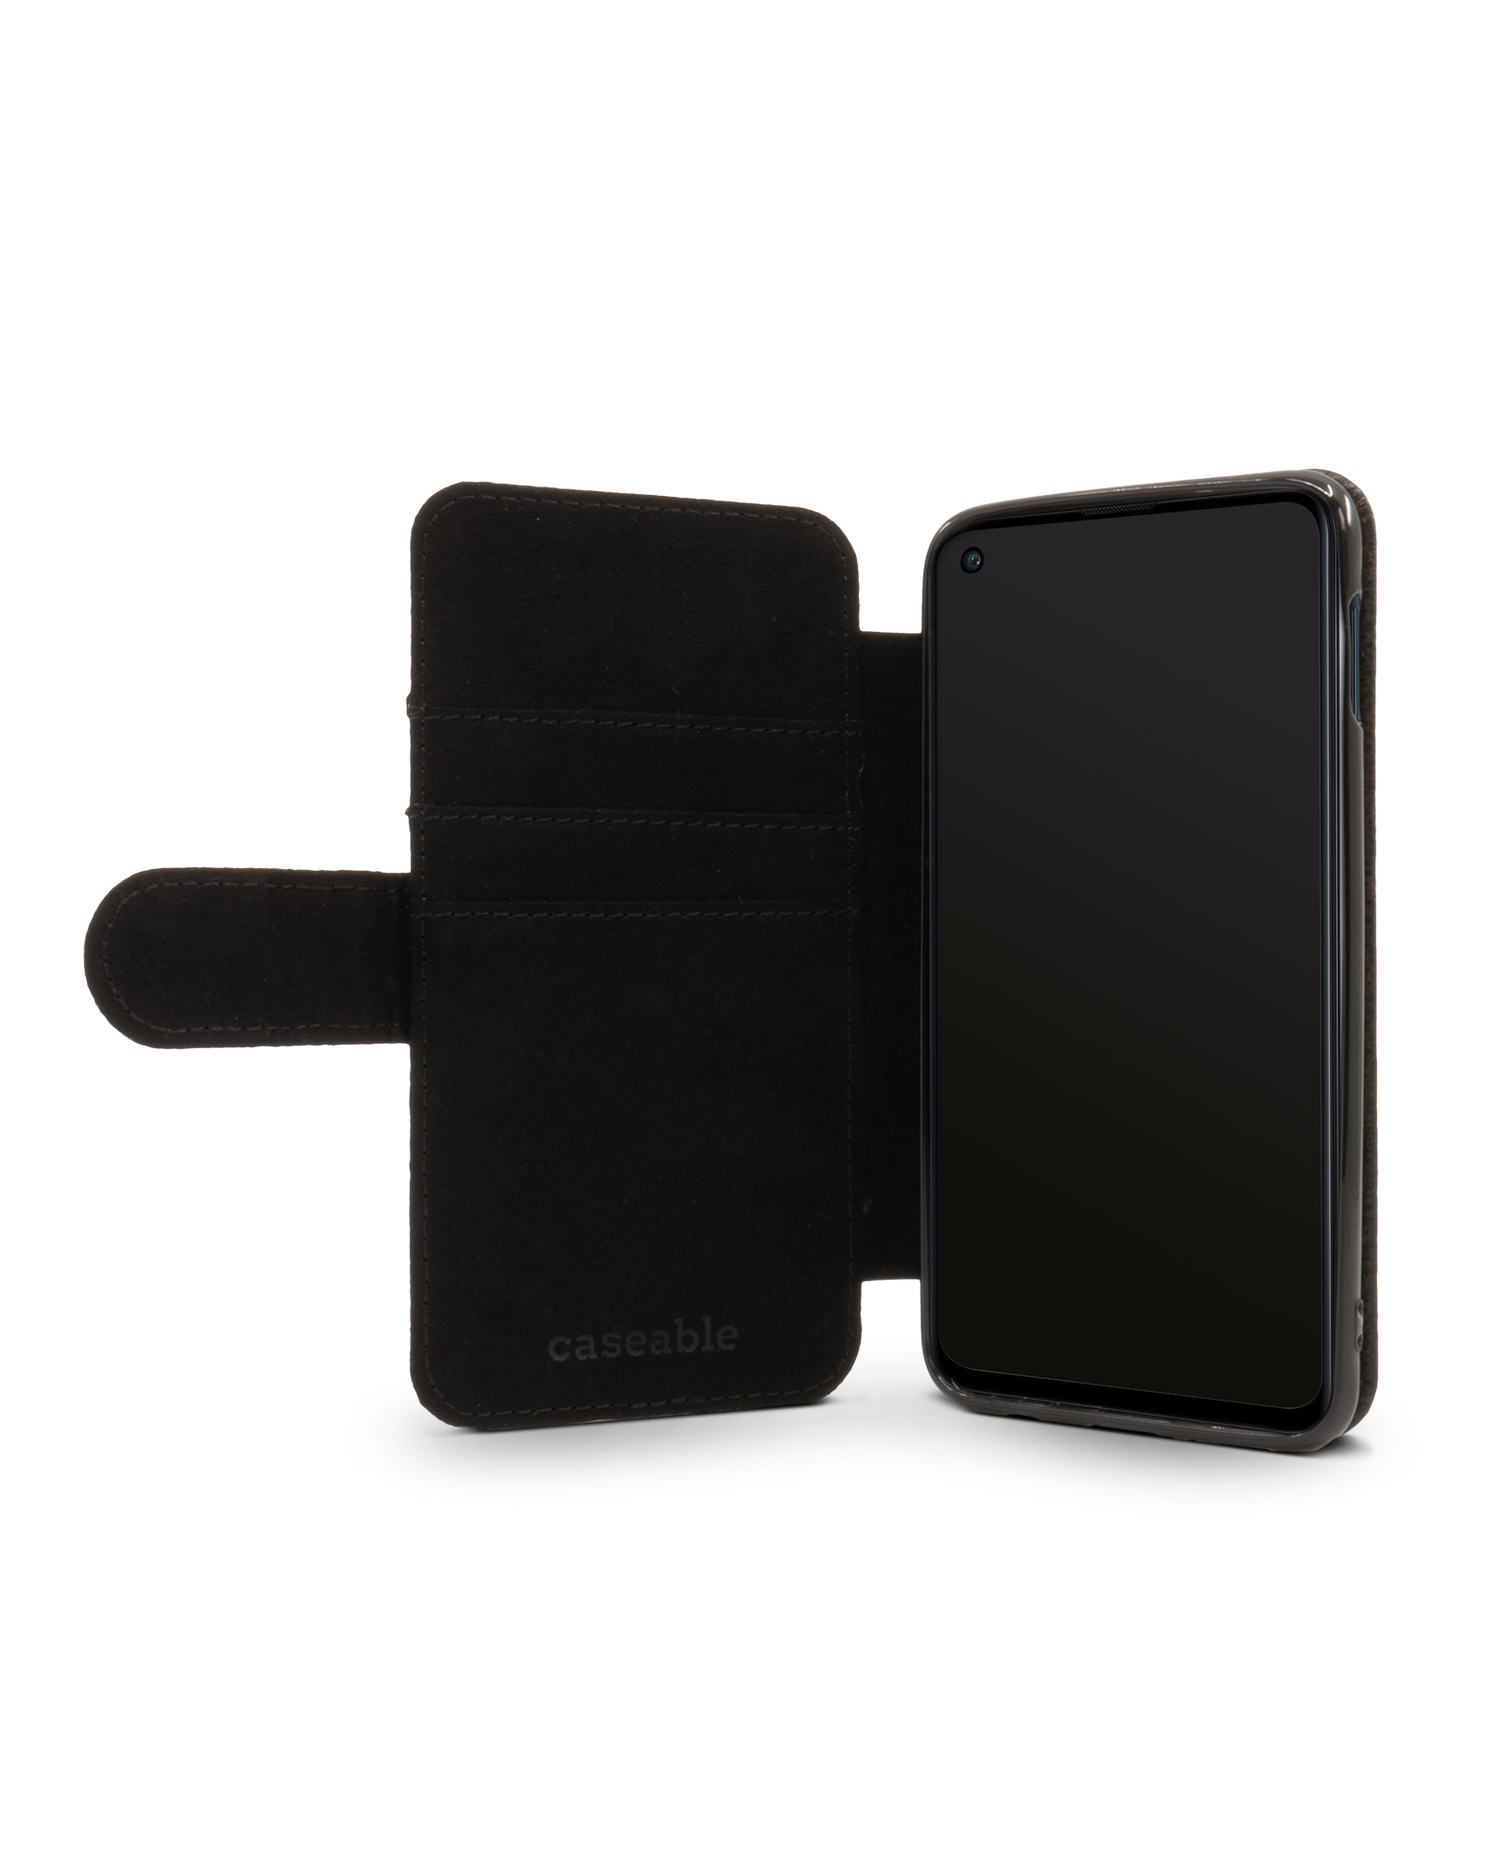 Grids Wallet Phone Case Samsung Galaxy S10e: Inside View